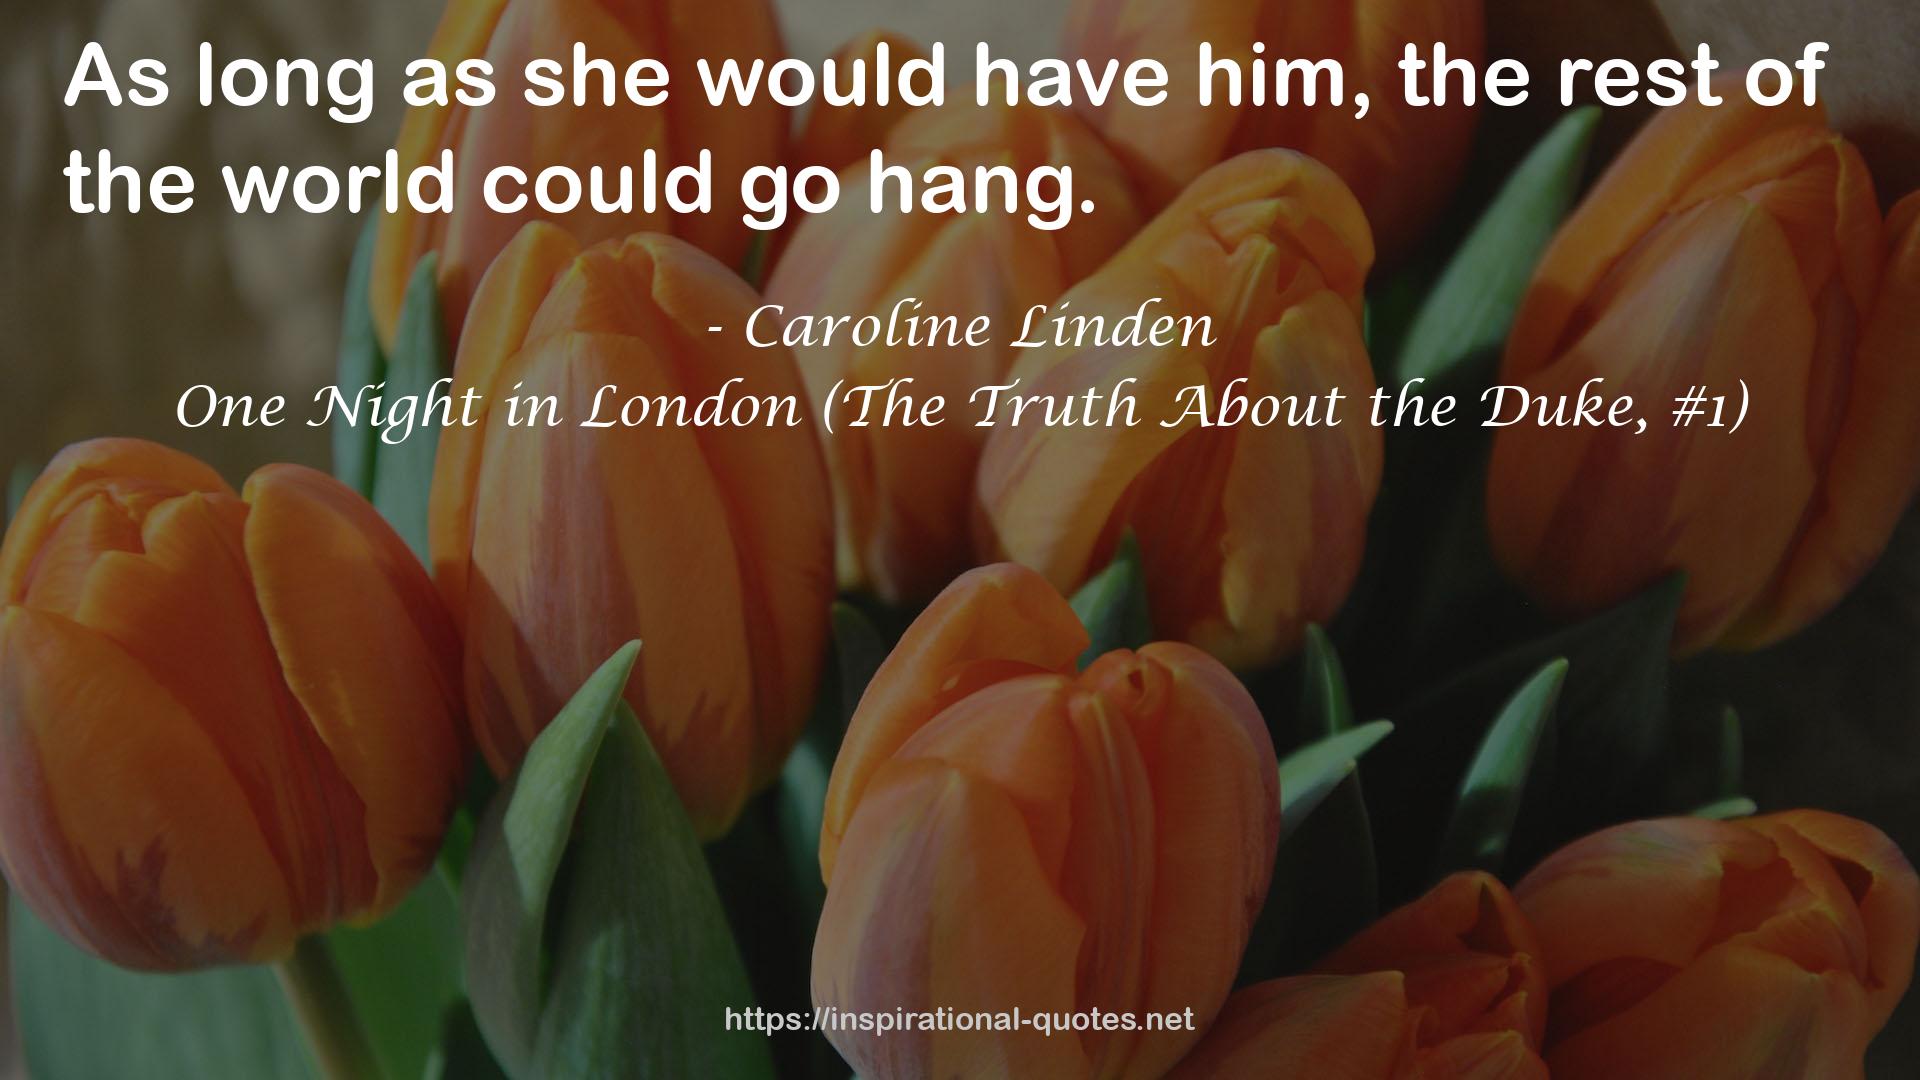 One Night in London (The Truth About the Duke, #1) QUOTES